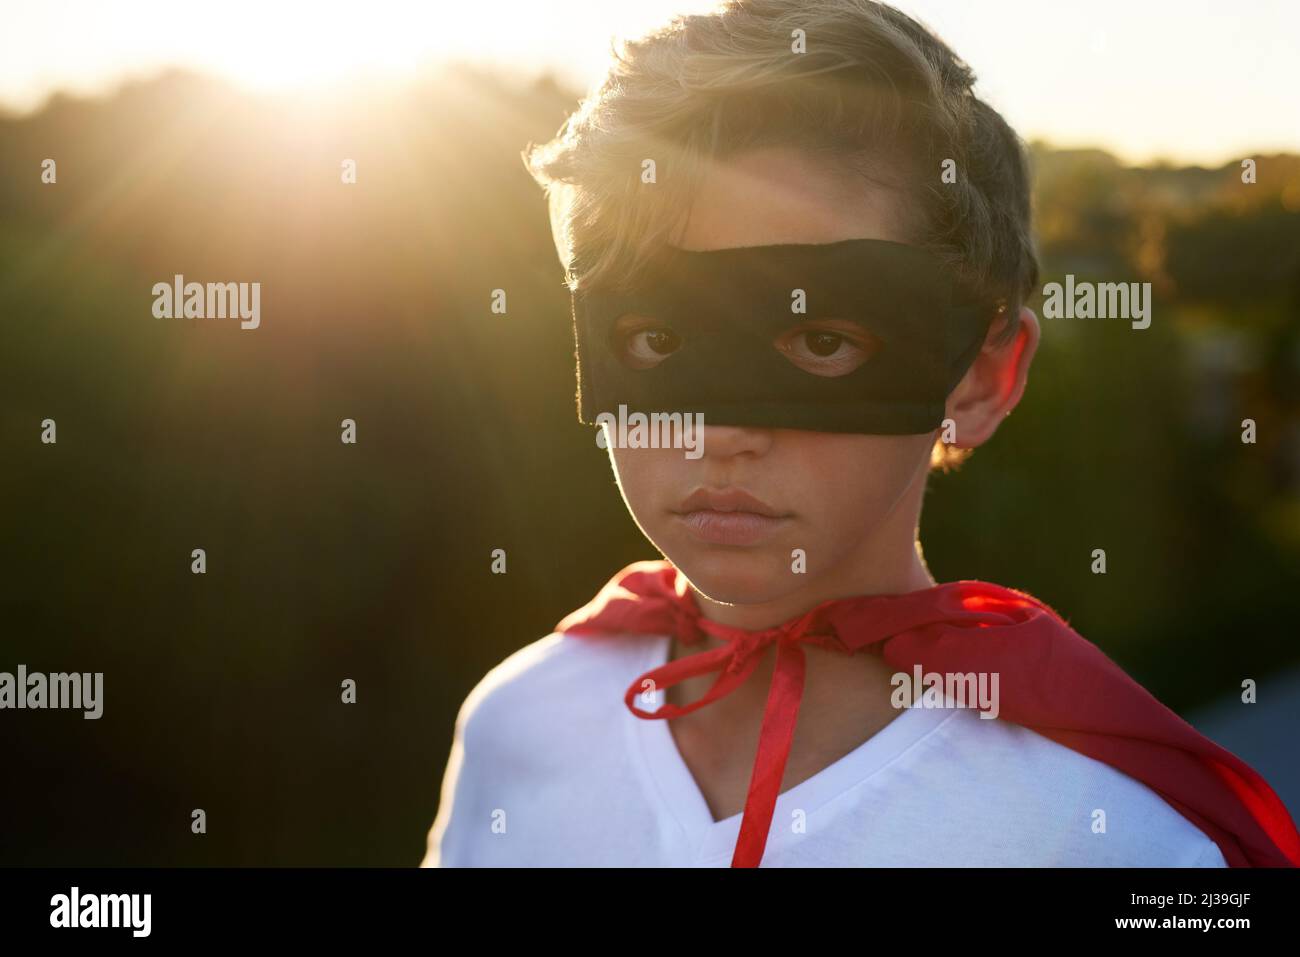 Bad guys beware. Portrait of a young boy in a cape and mask playing superhero outside. Stock Photo